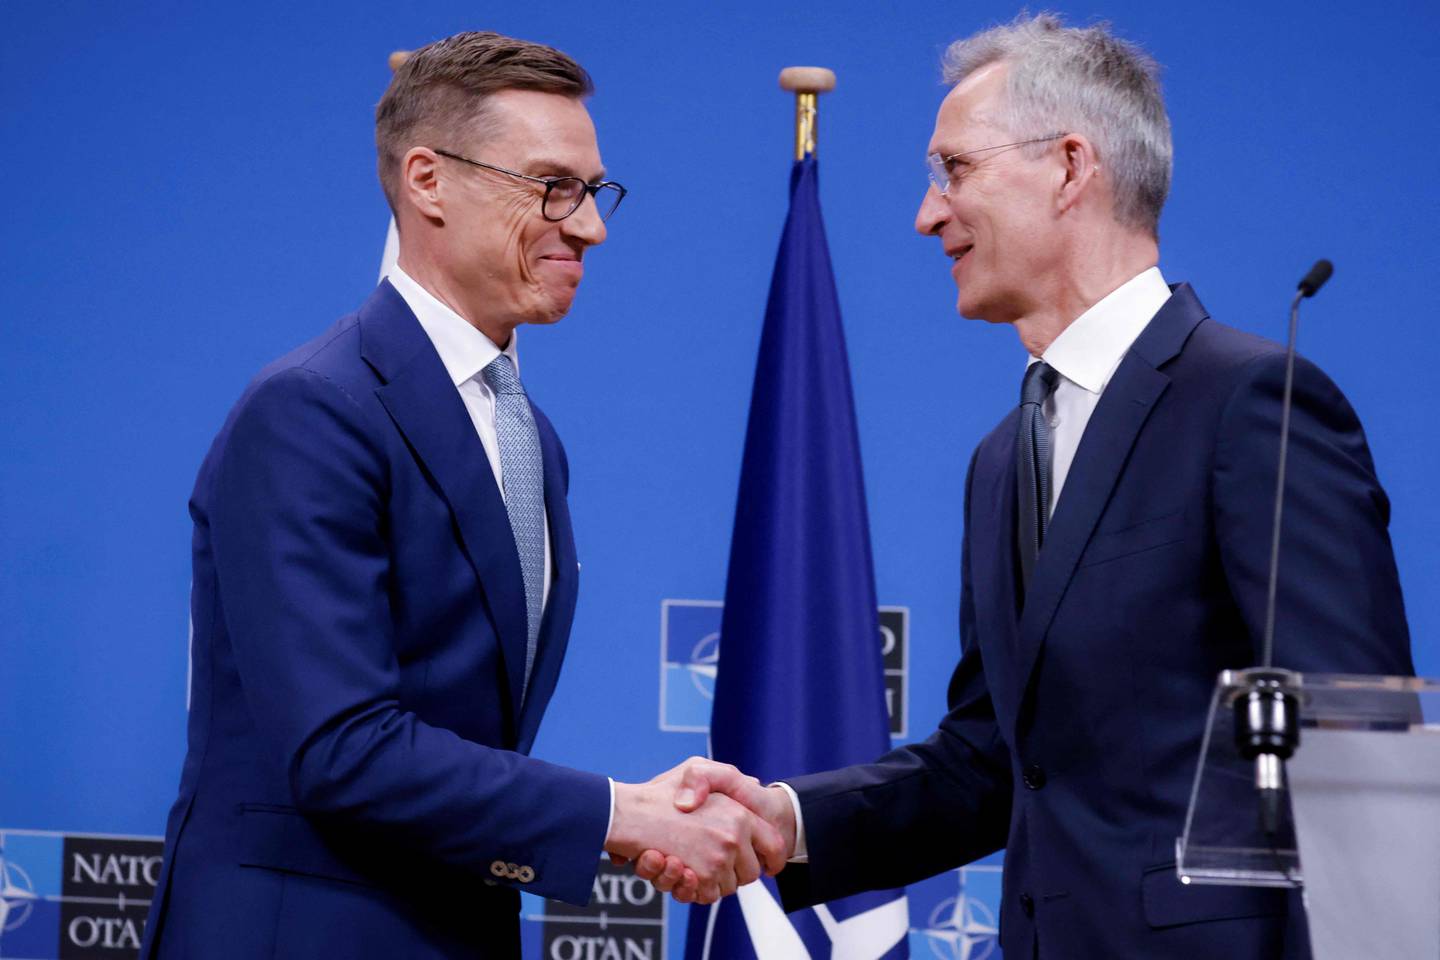 NATO Secretary General, Jens Stoltenberg (R) shakes hands with Finnish President Alexander Stubb after a press conference at the NATO headquarters in Brussels, on April 10, 2024. (Photo by Kenzo TRIBOUILLARD / AFP)